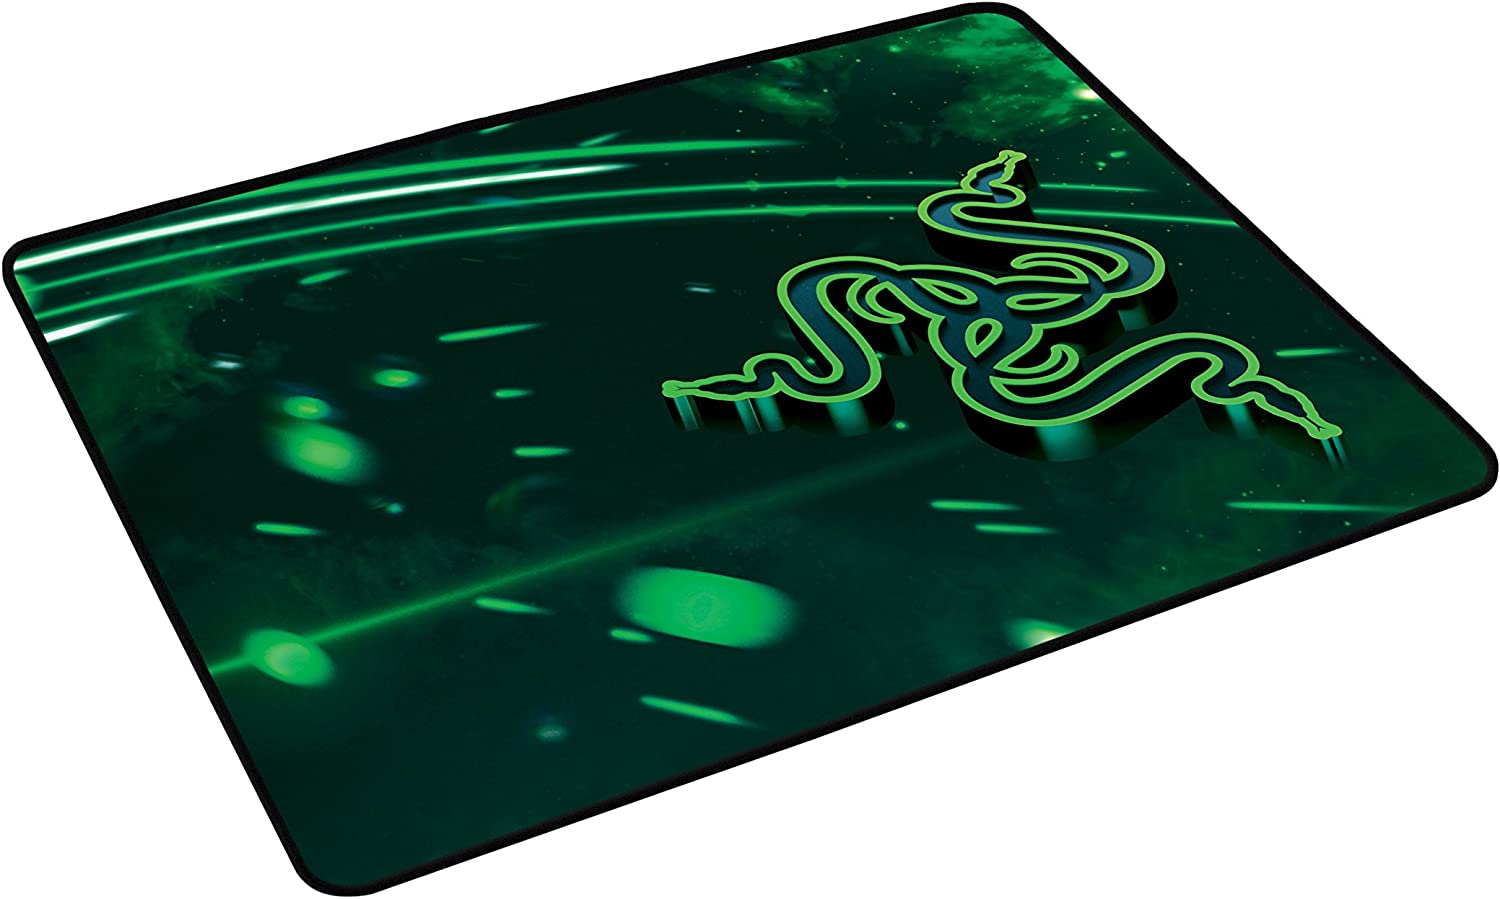 Razer Goliathus Speed Cosmic Edition Soft Gaming Mouse Mat - XL Size